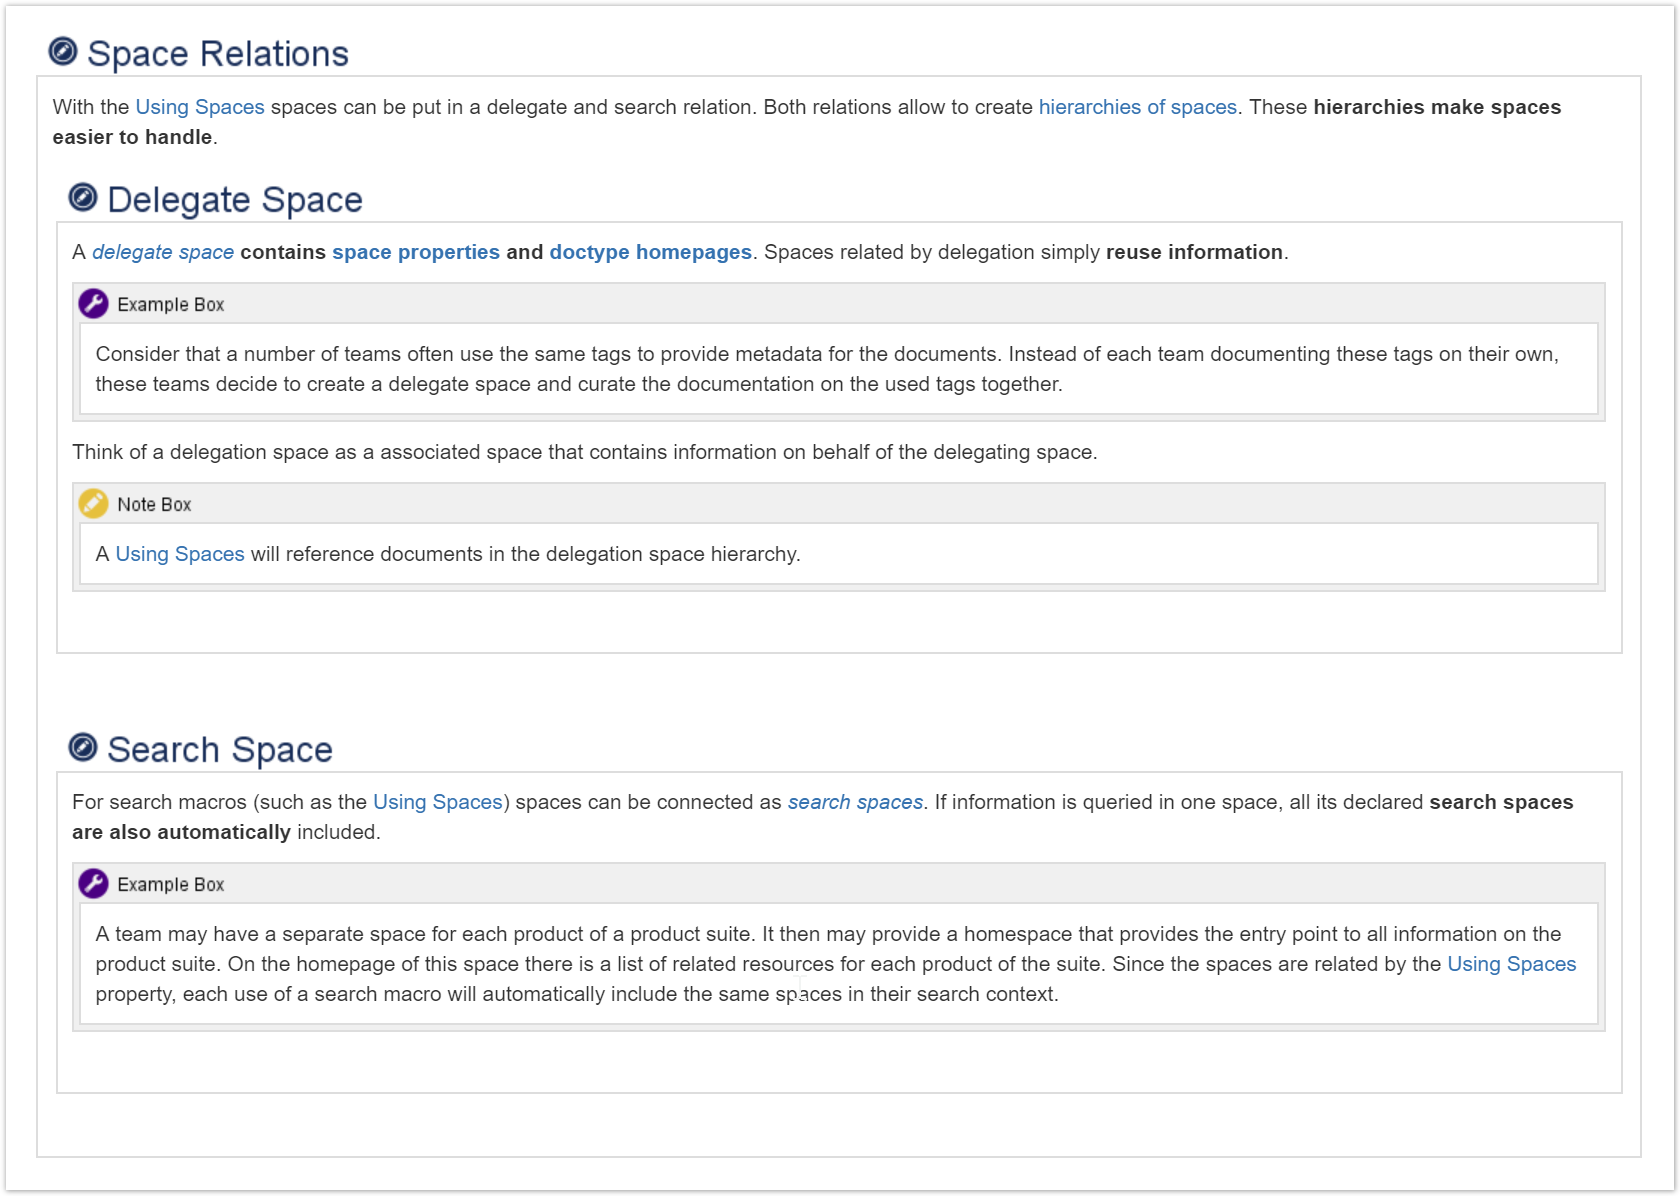 The screenshot from the Confluence editor shows a section with two subsections